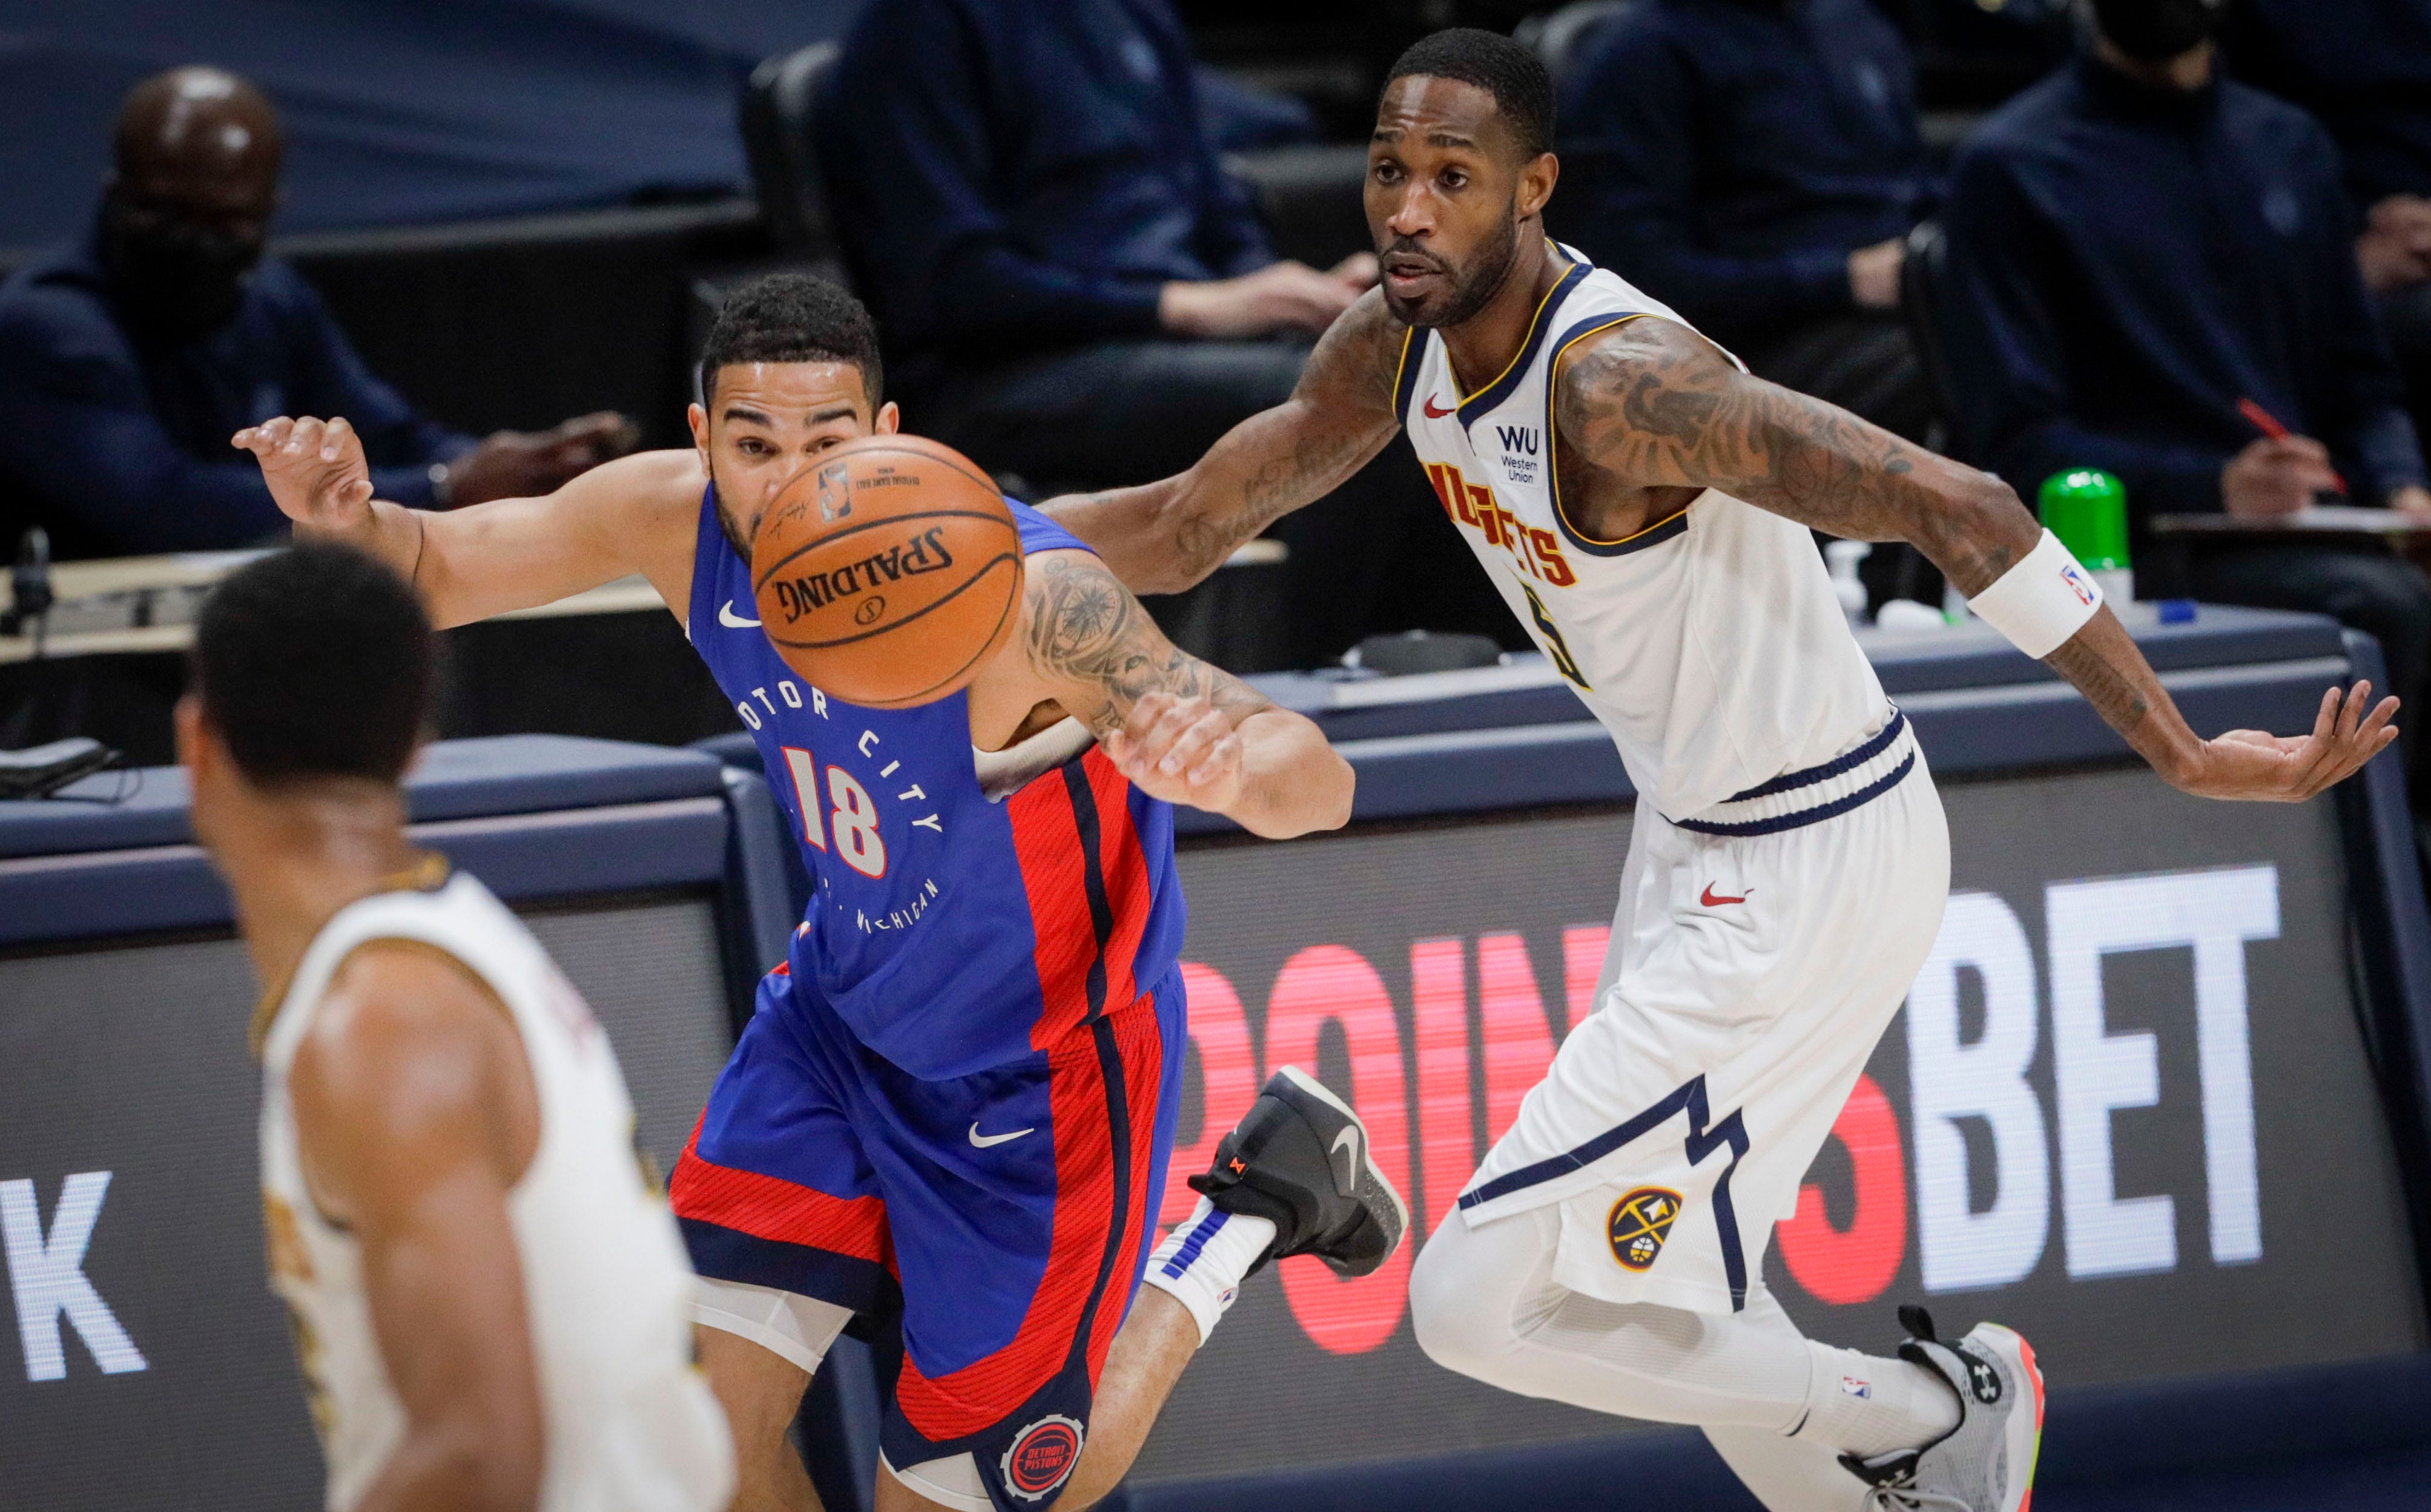 Detroit Pistons guard Cory Joseph (18) dribbles past Denver Nuggets forward Will Barton (5) in the fourth quarter of an NBA basketball game in Denver, Tuesday, April 6, 2021. Denver won 134-119.